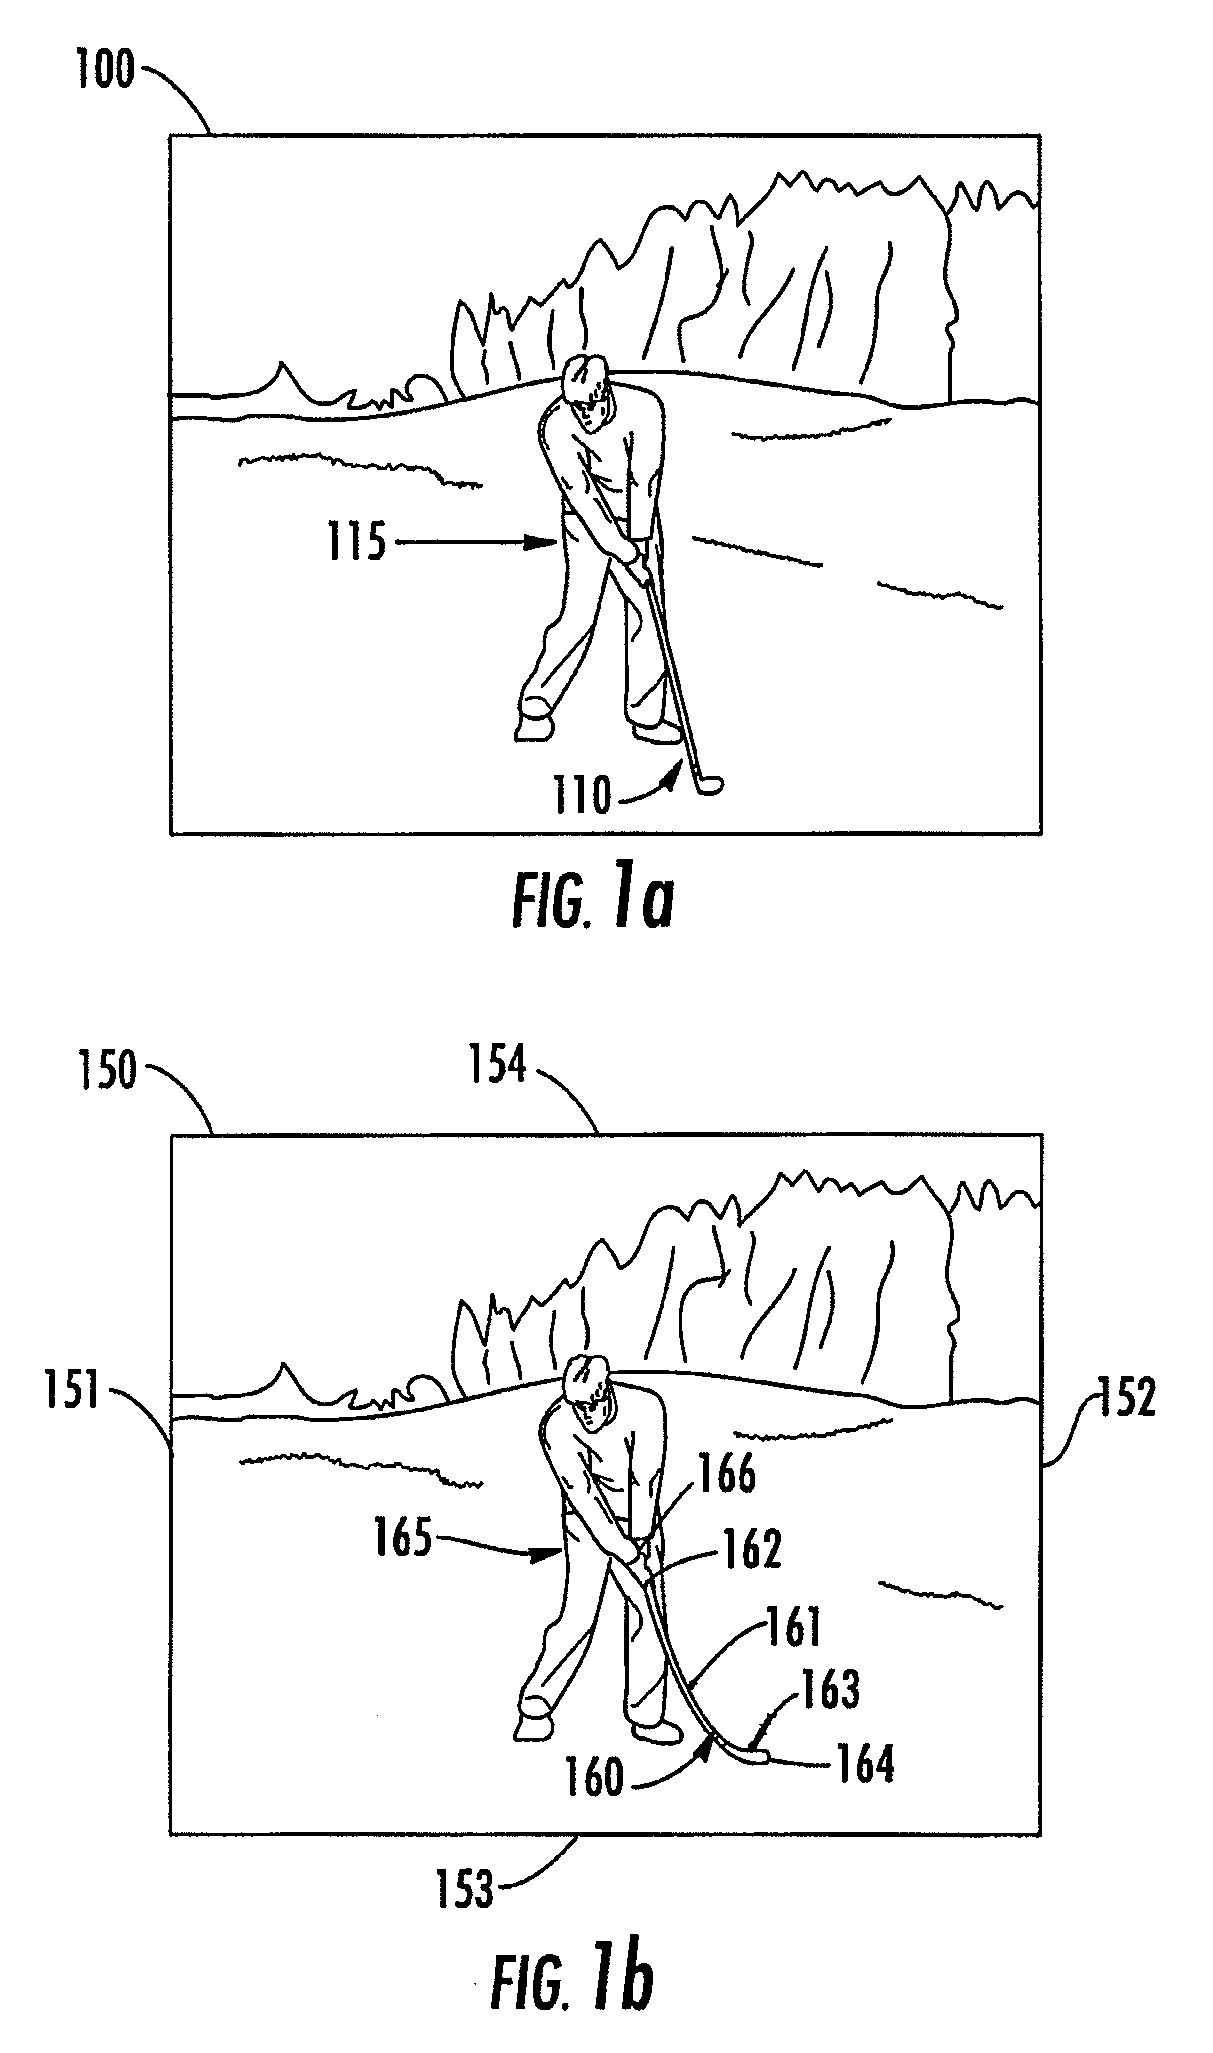 System, method, device, and computer program product for providing image correction